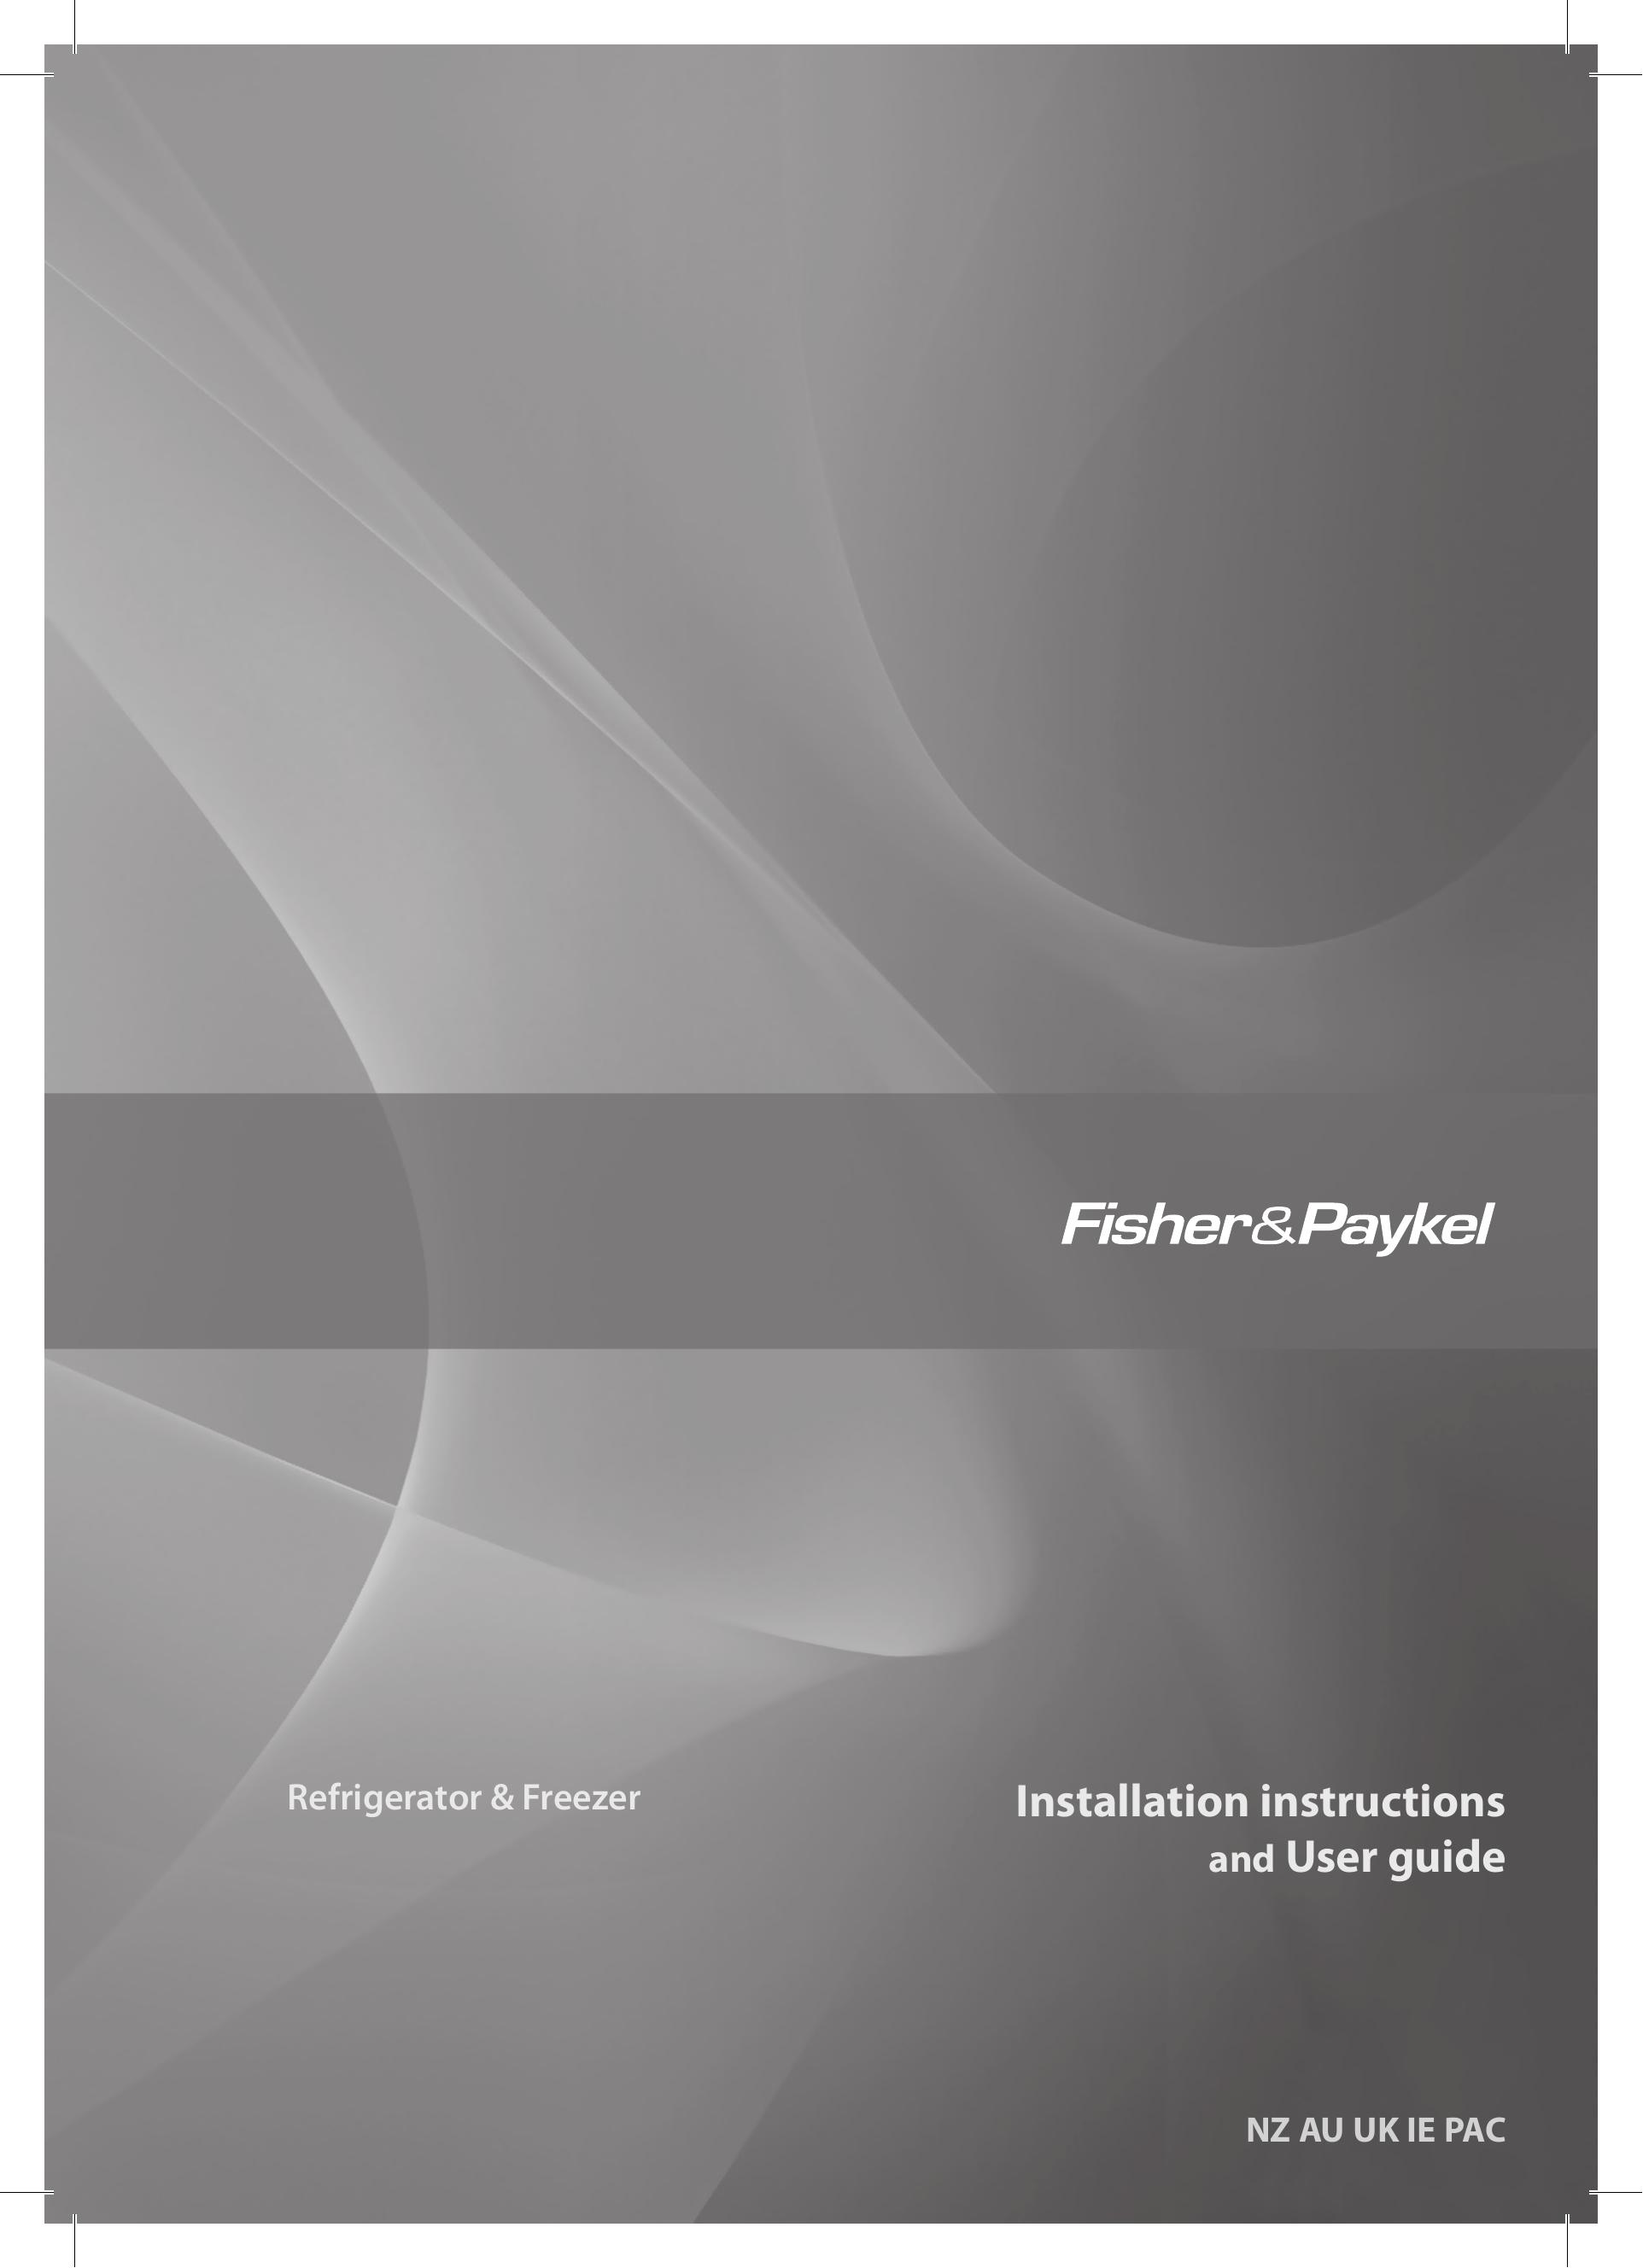 Fisher & Paykel E388 Refrigerator User Manual